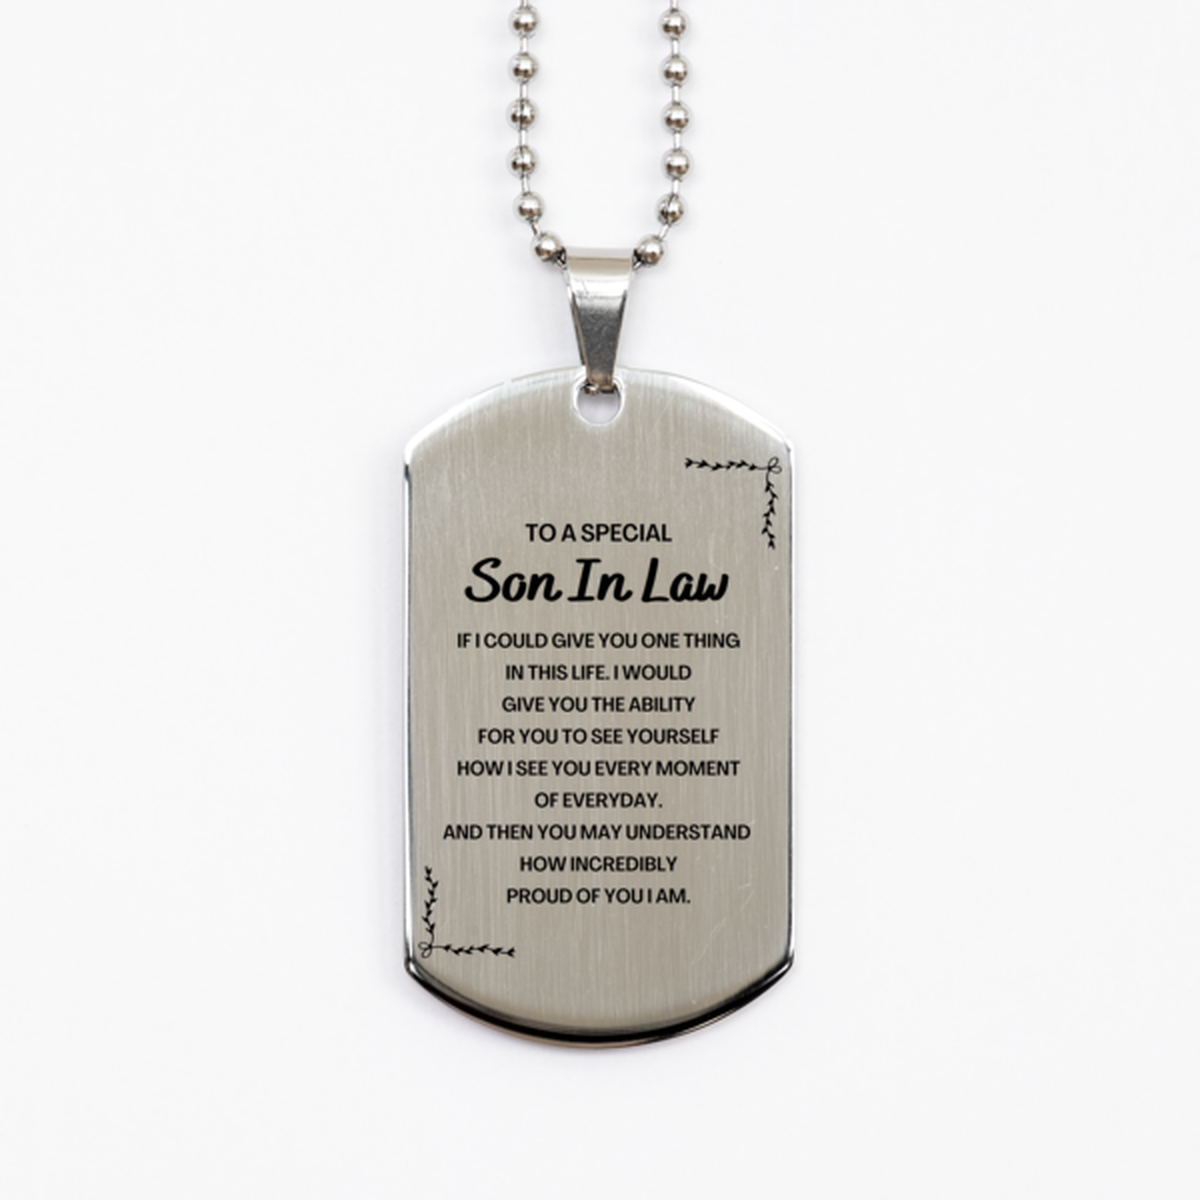 To My Son In Law Silver Dog Tag, Gifts For Son In Law Engraved, Inspirational Gifts for Christmas Birthday, Epic Gifts for Son In Law To A Special Son In Law how incredibly proud of you I am